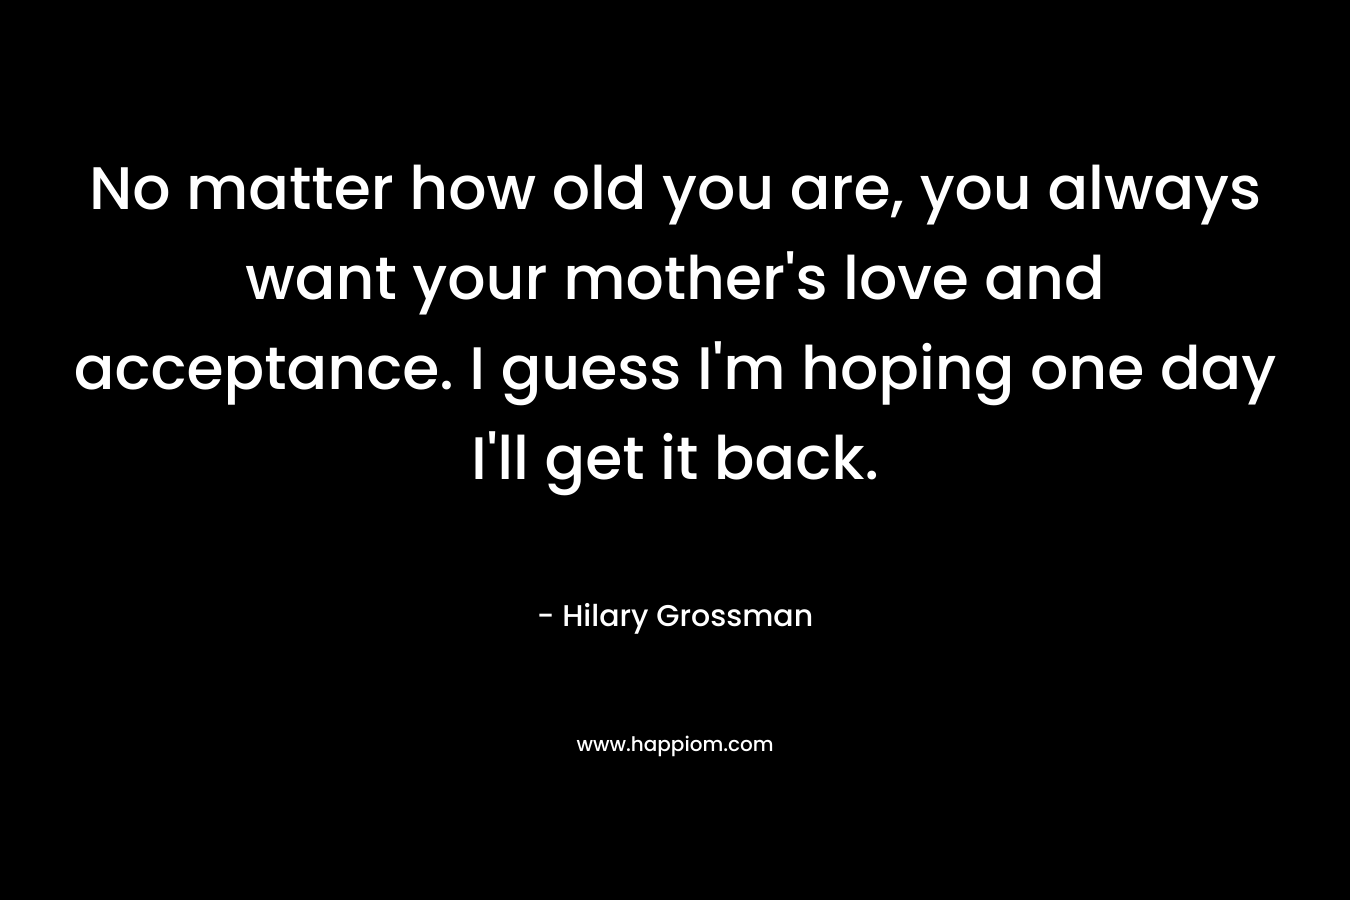 No matter how old you are, you always want your mother’s love and acceptance. I guess I’m hoping one day I’ll get it back. – Hilary Grossman